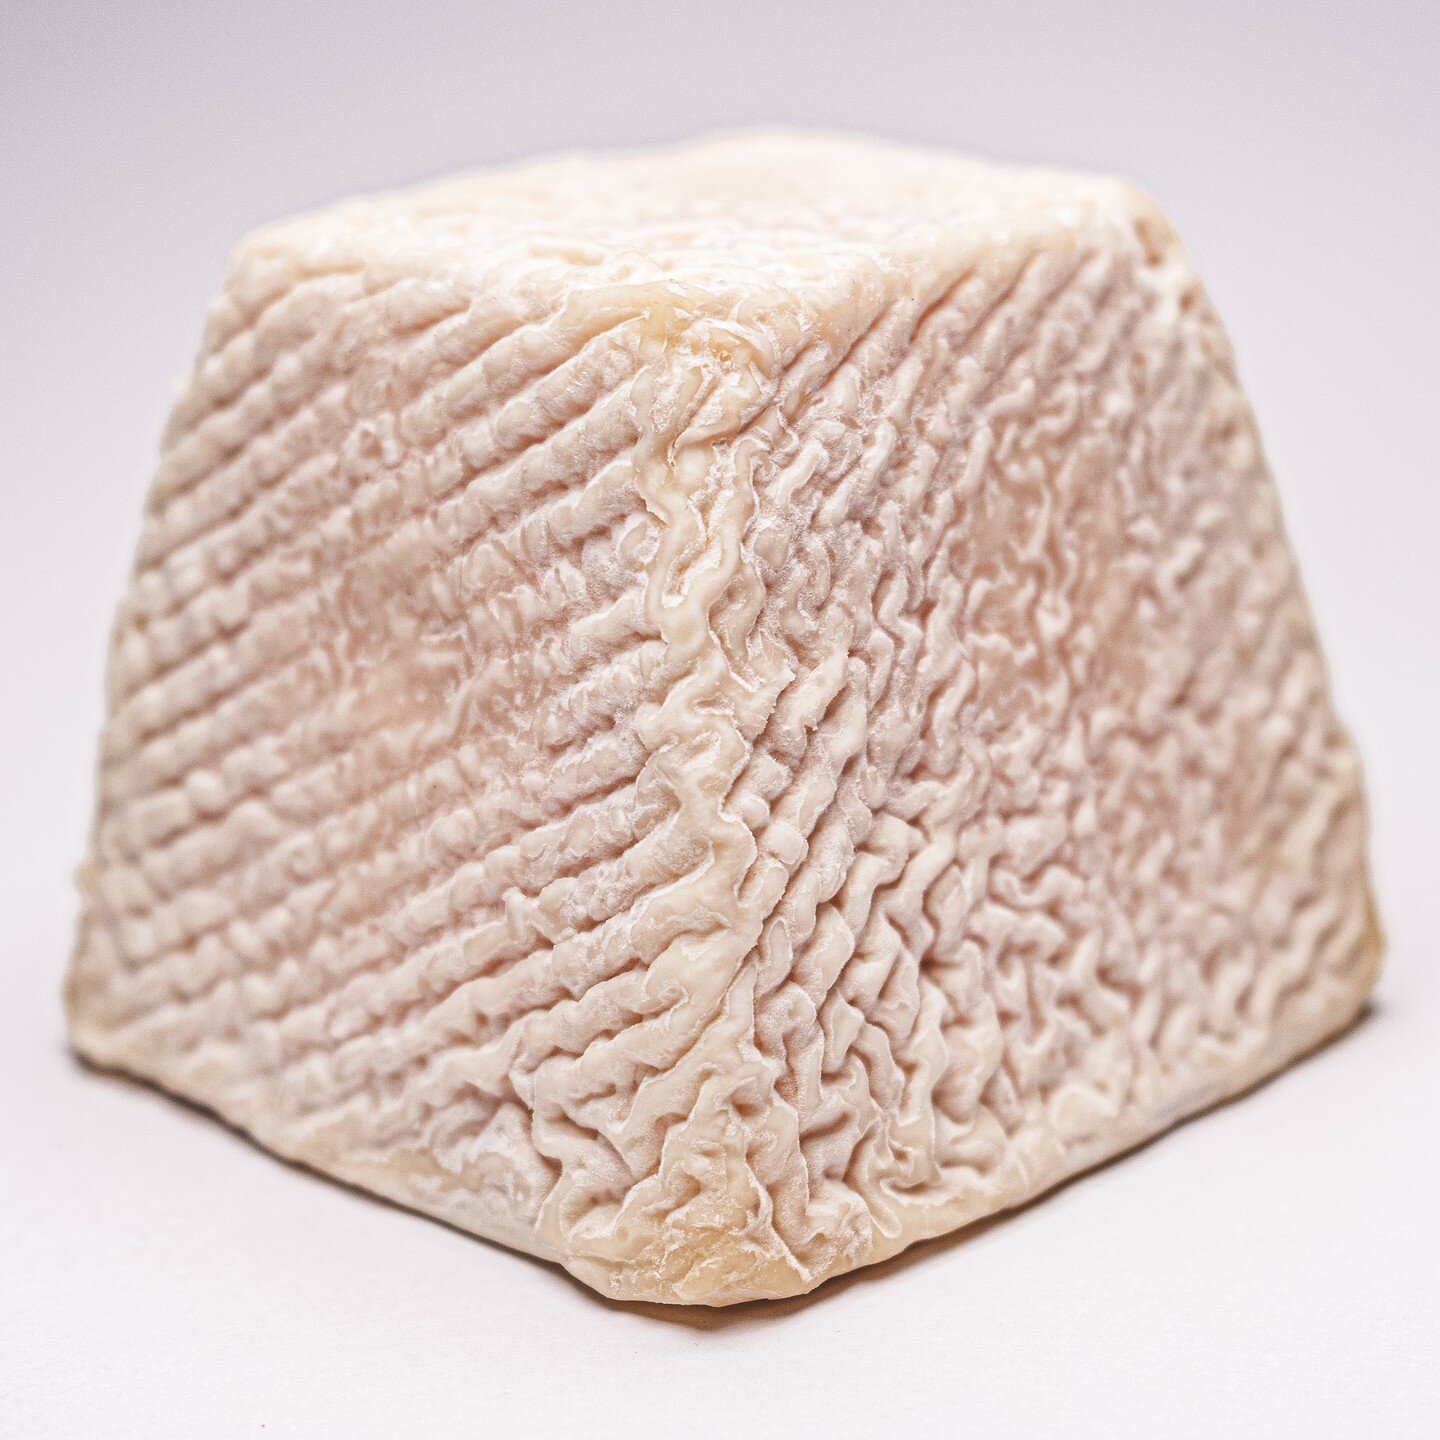 Throughout April we will be highlighting some of the amazing new products that we have added to our already extensive range.

First up is the multiple award winning Sinodun Hill - this is a truly amazing goats milk cheese made by the experts @nortona